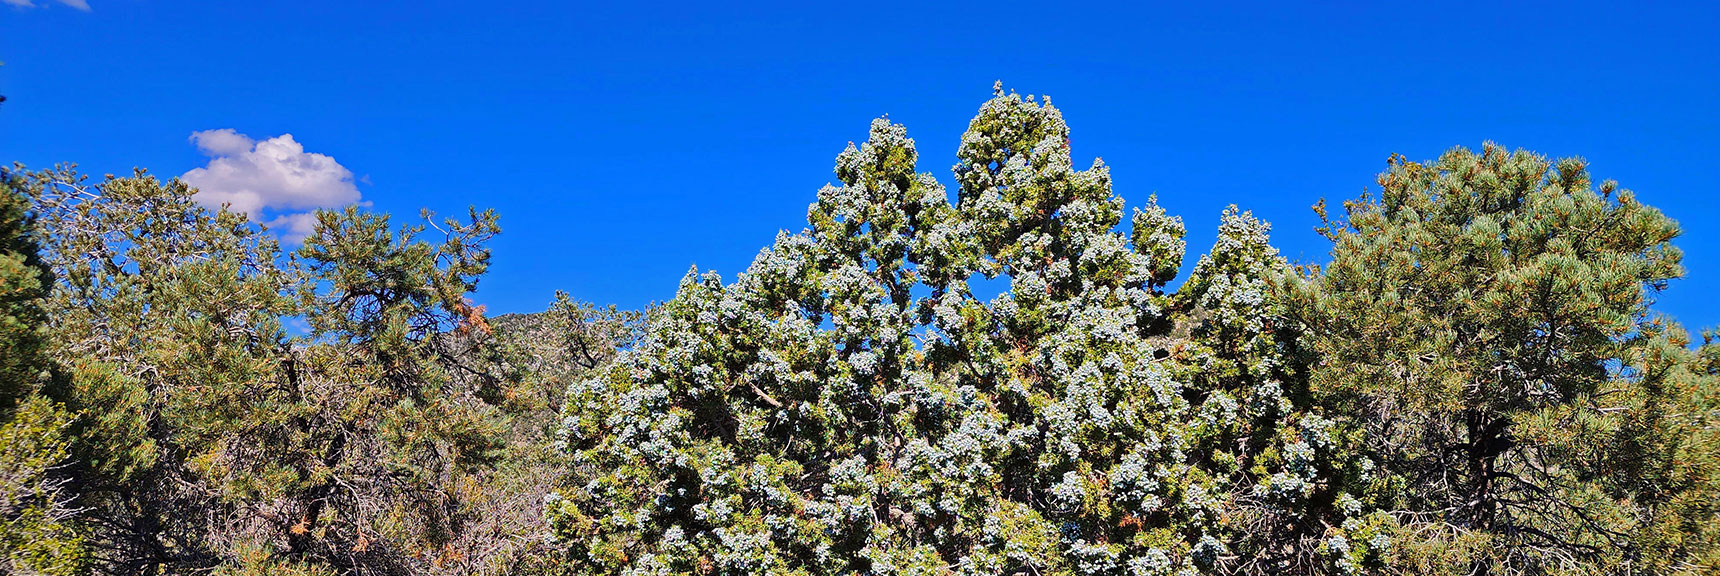 Juniper Tree Filled with New Berries. | Red Rock Summit | Lovell Canyon & Rainbow Mountain Wilderness, Nevada